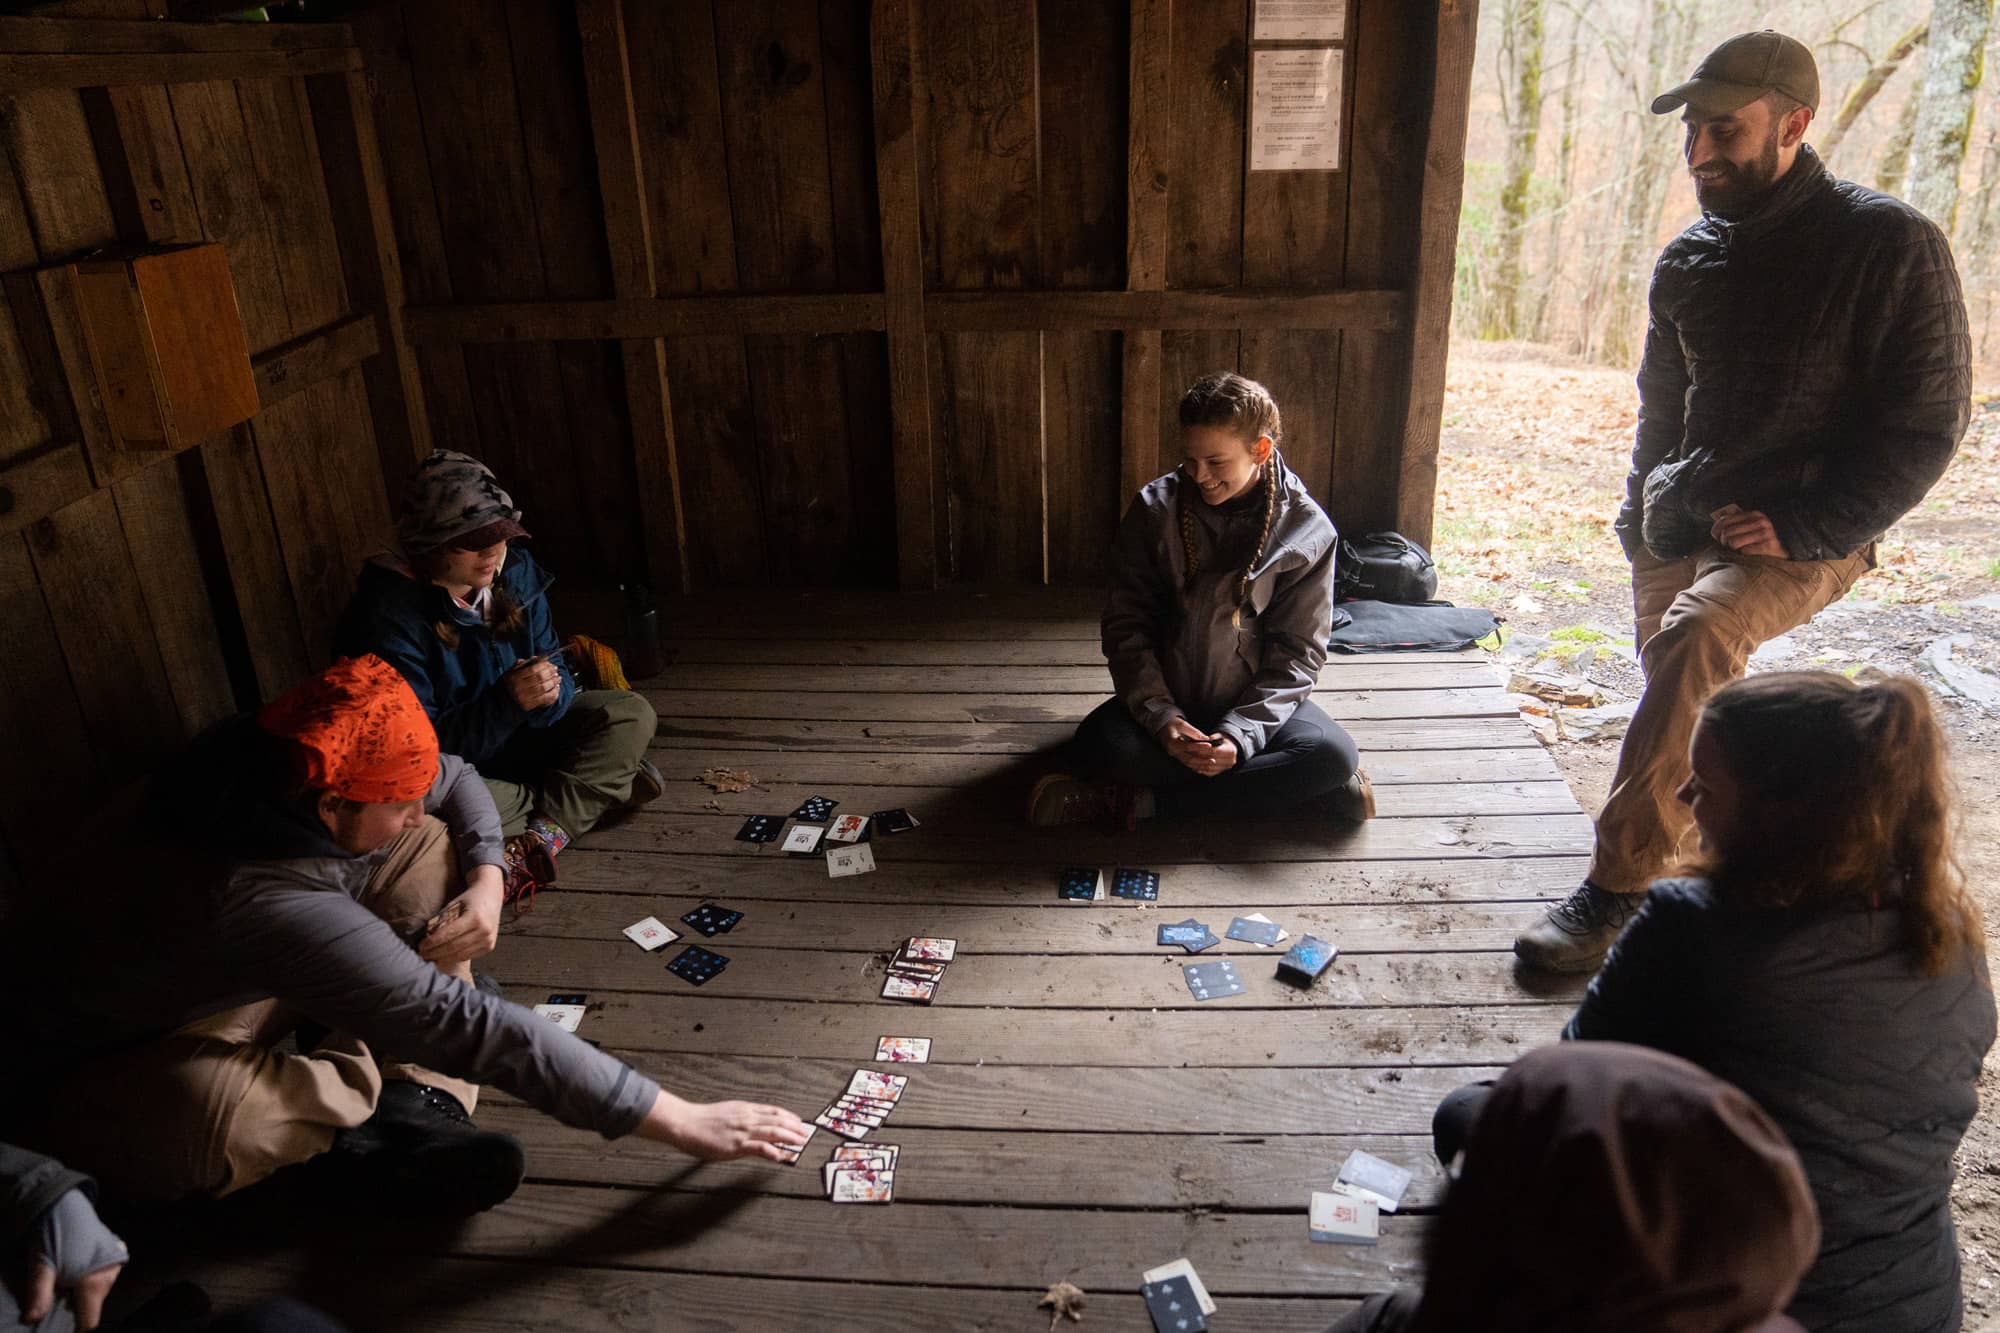 Ohio University students play cards together during their third day backpacking a section of the Appalachian Trail in the Nantahala National Forest on Monday, March 7, 2022, at the Siler Bald Shelter near Franklin, North Carolina.